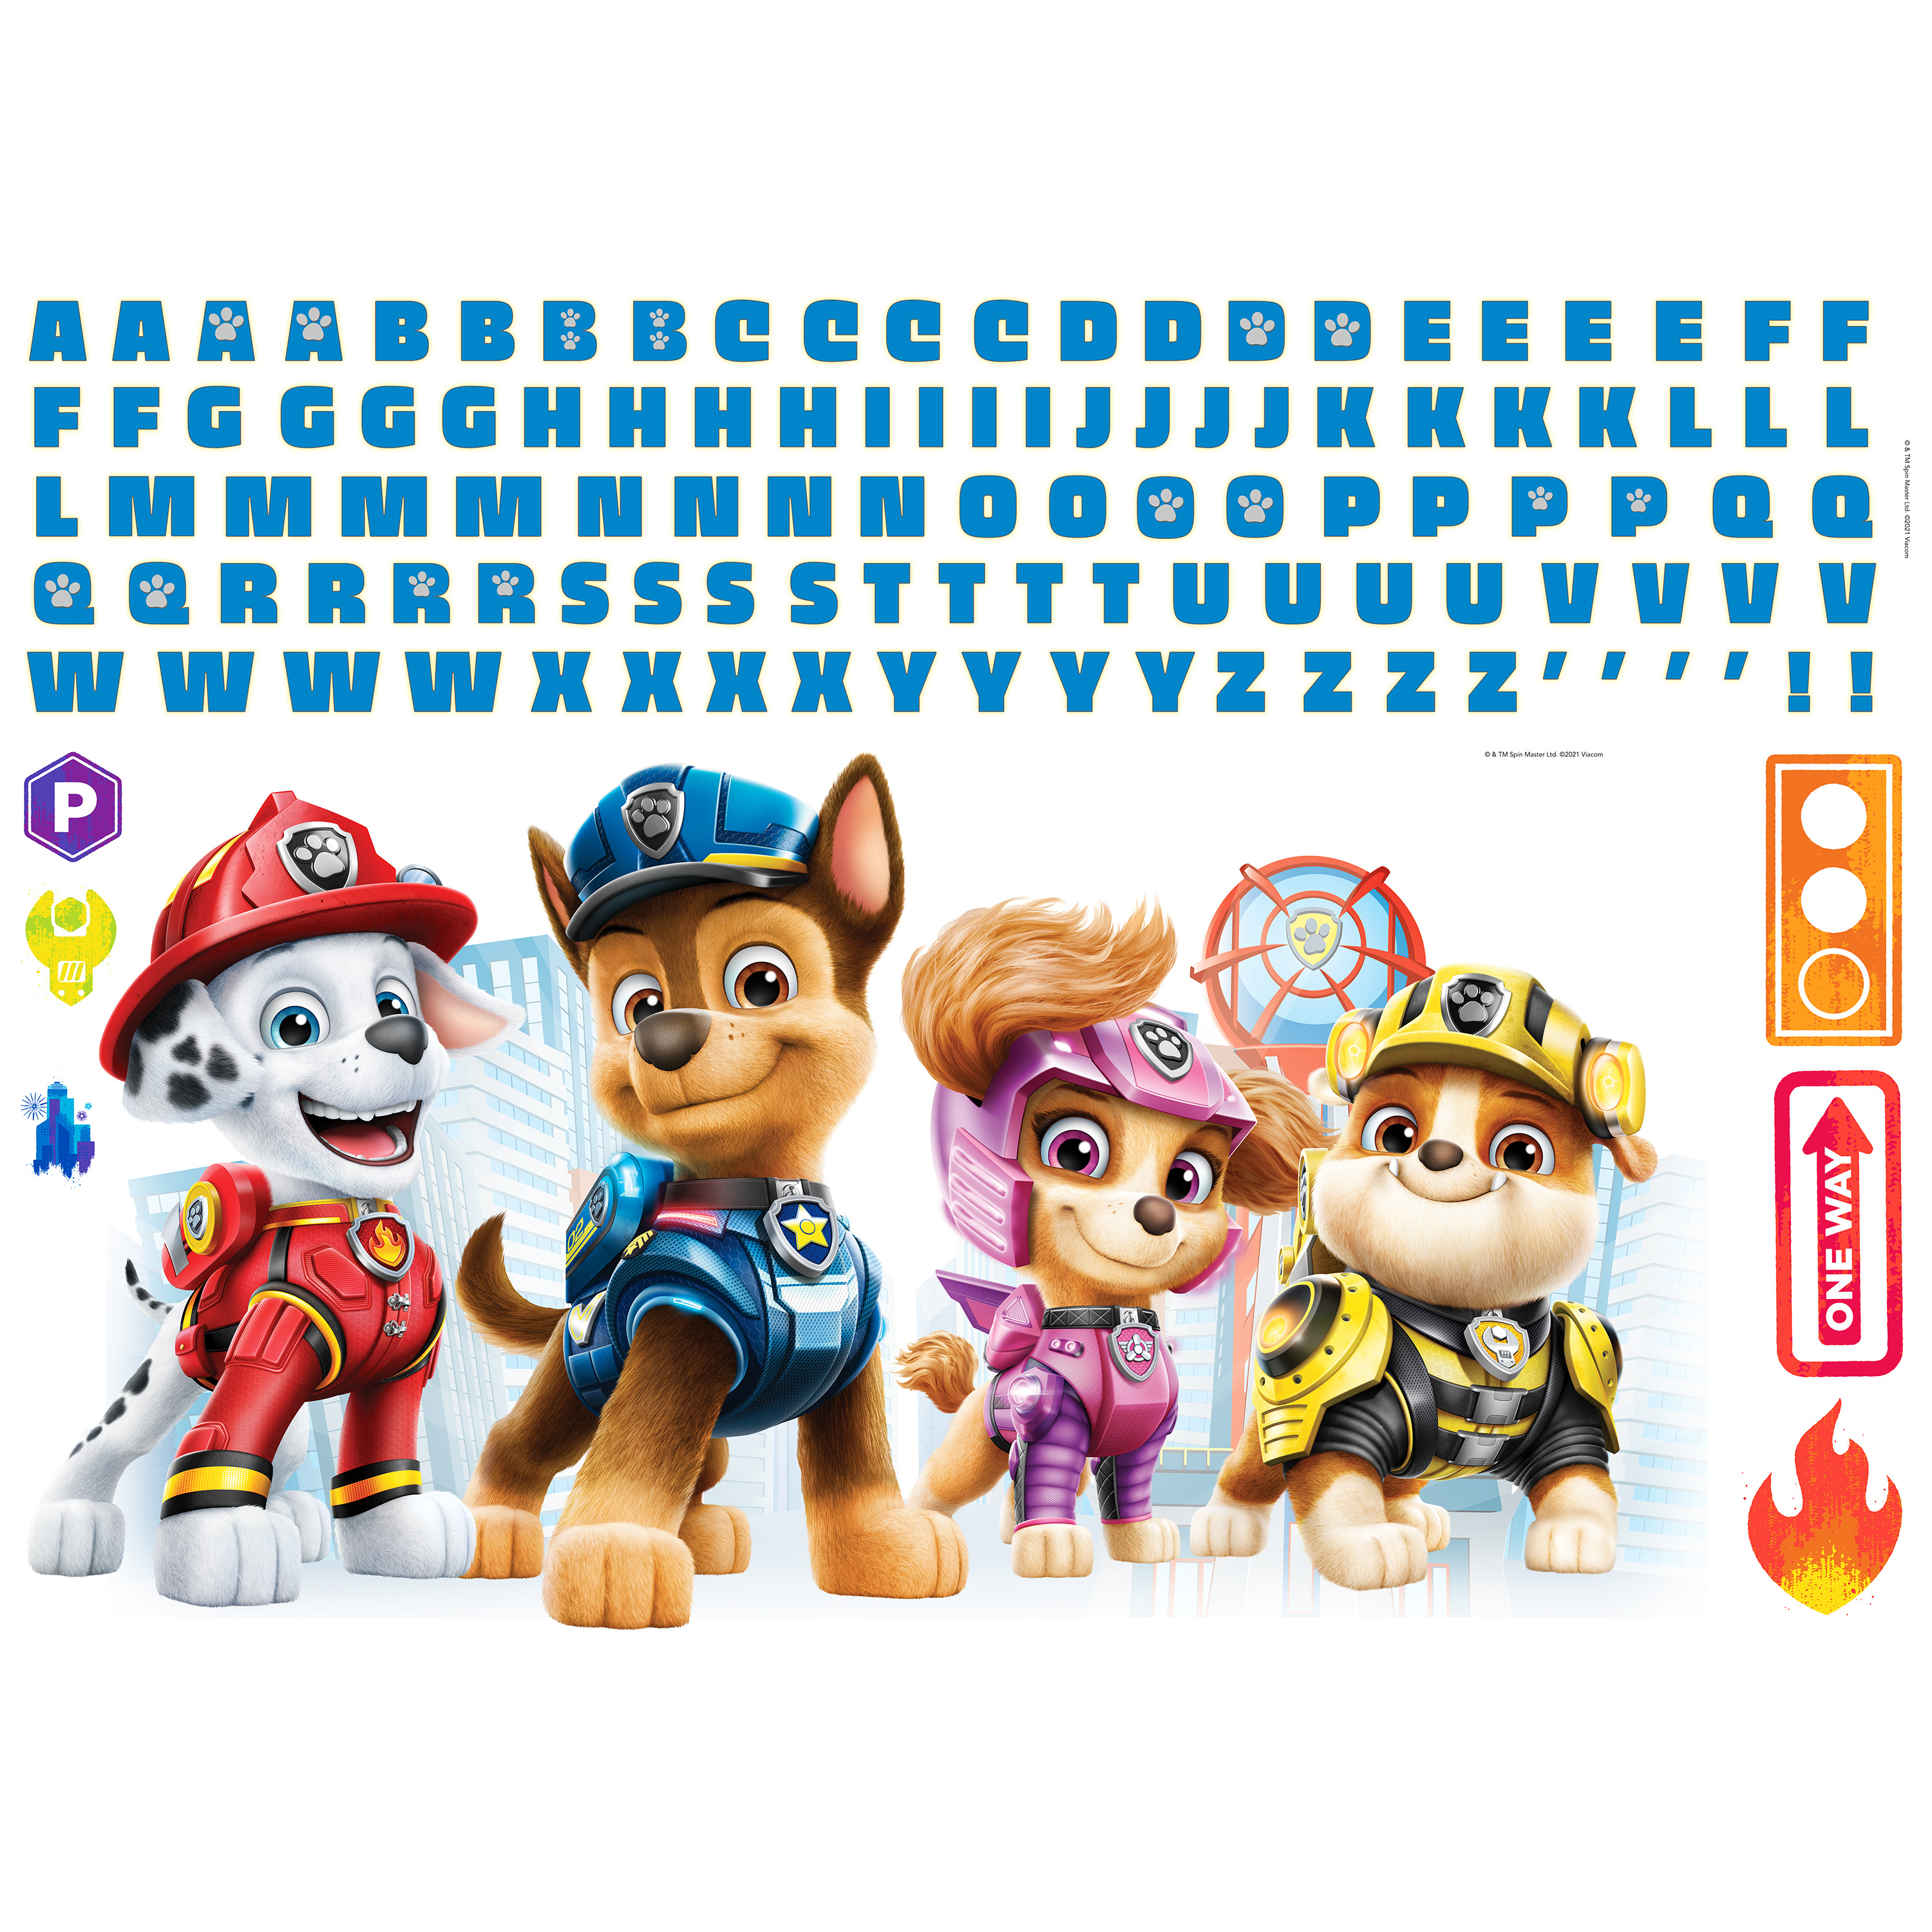 3000px x 3000px - Paw Patrol Wall Decals, by RoomMates 117 Pack - Walmart.com